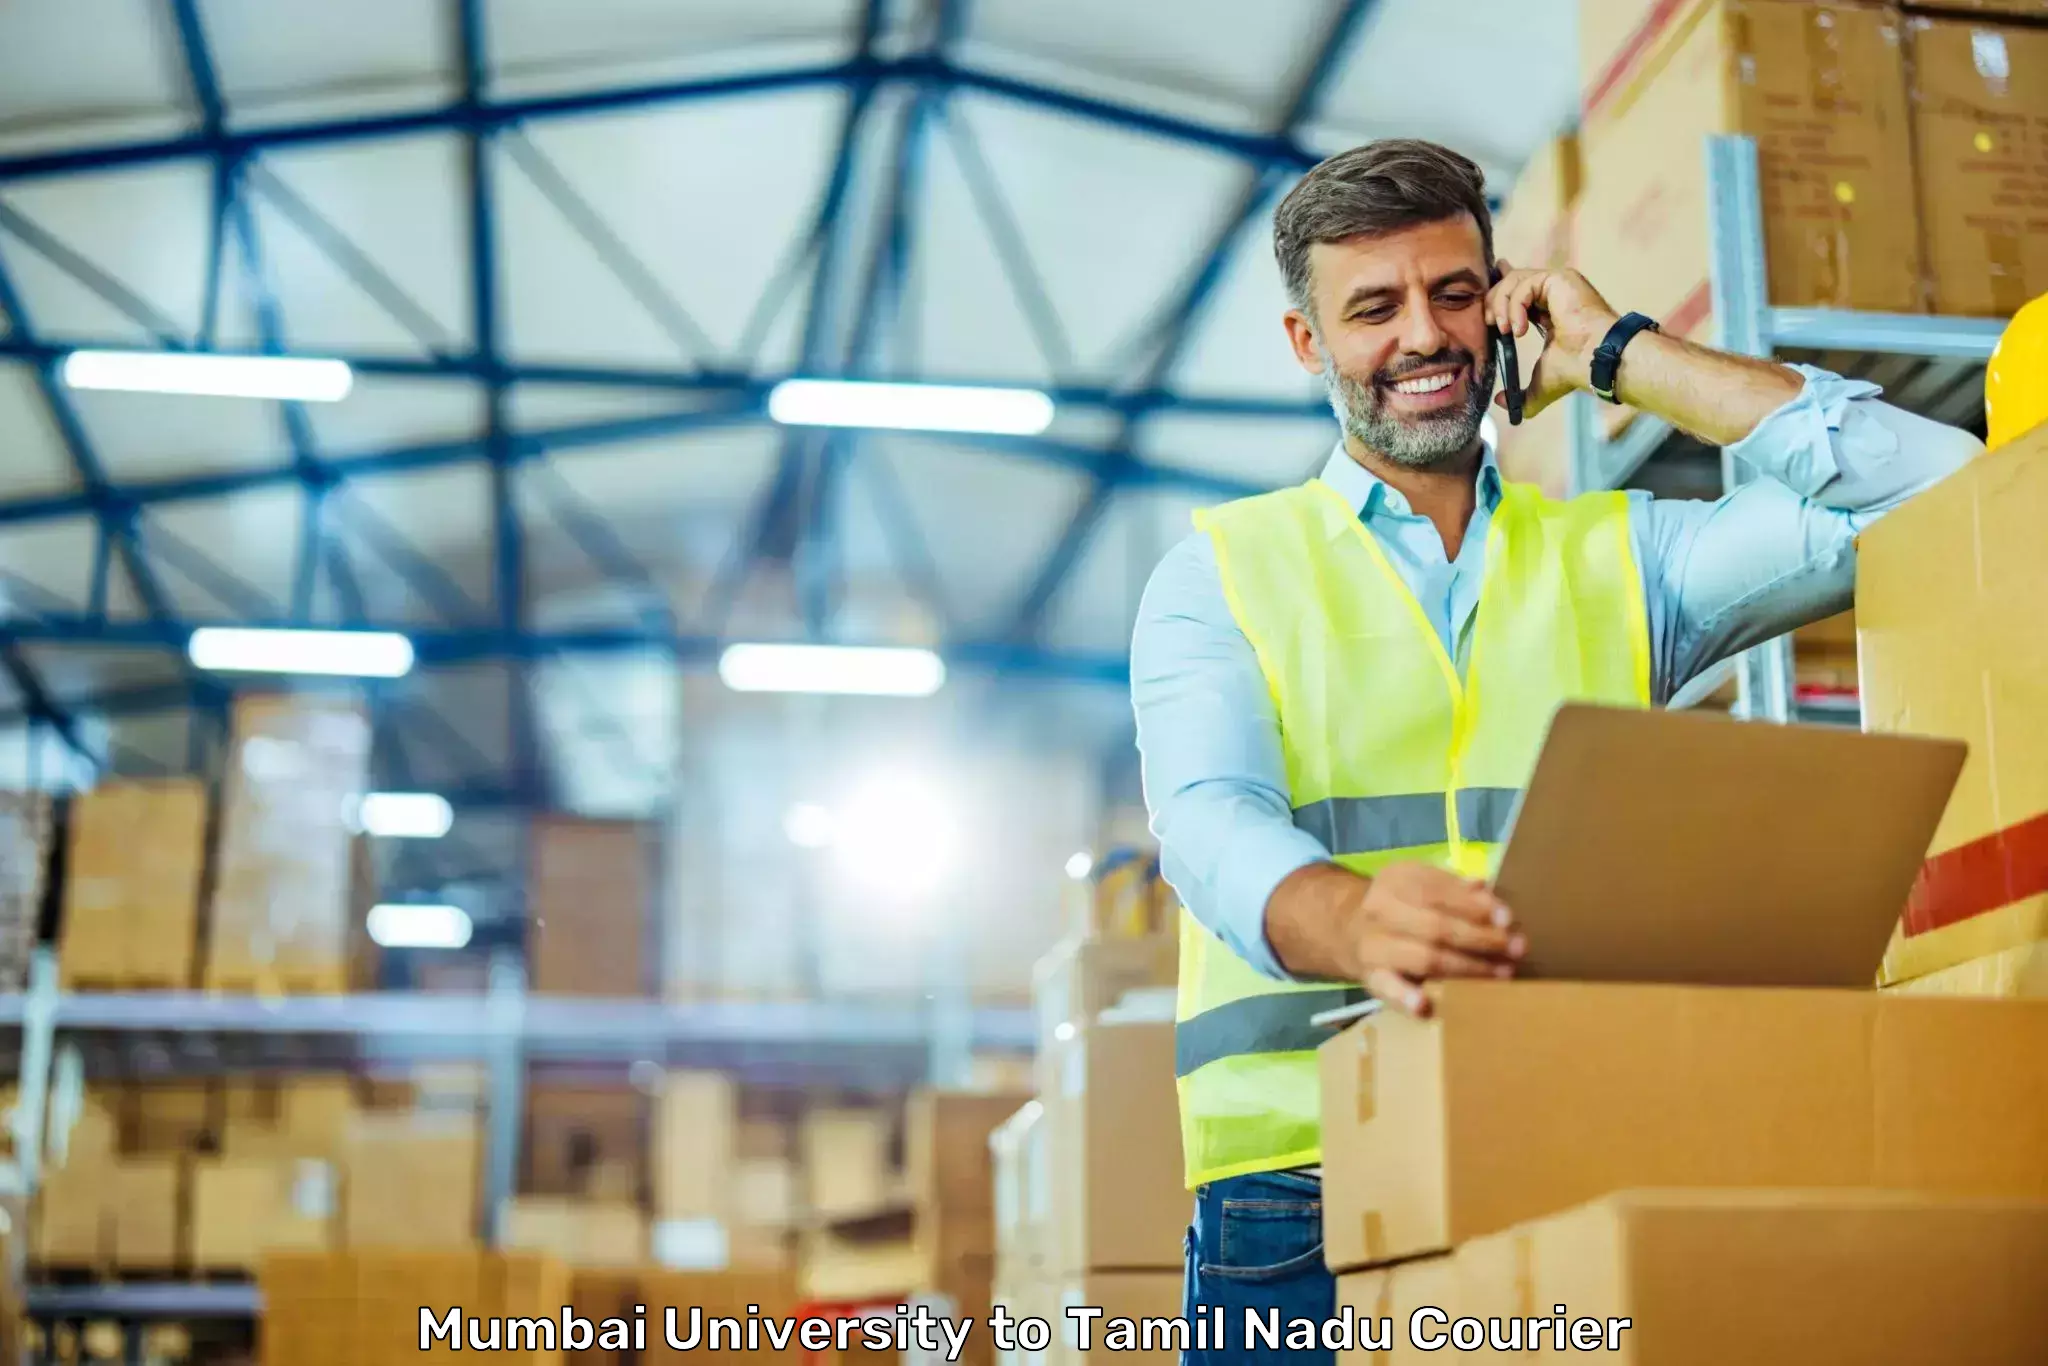 Courier services in Mumbai University to Tamil Nadu